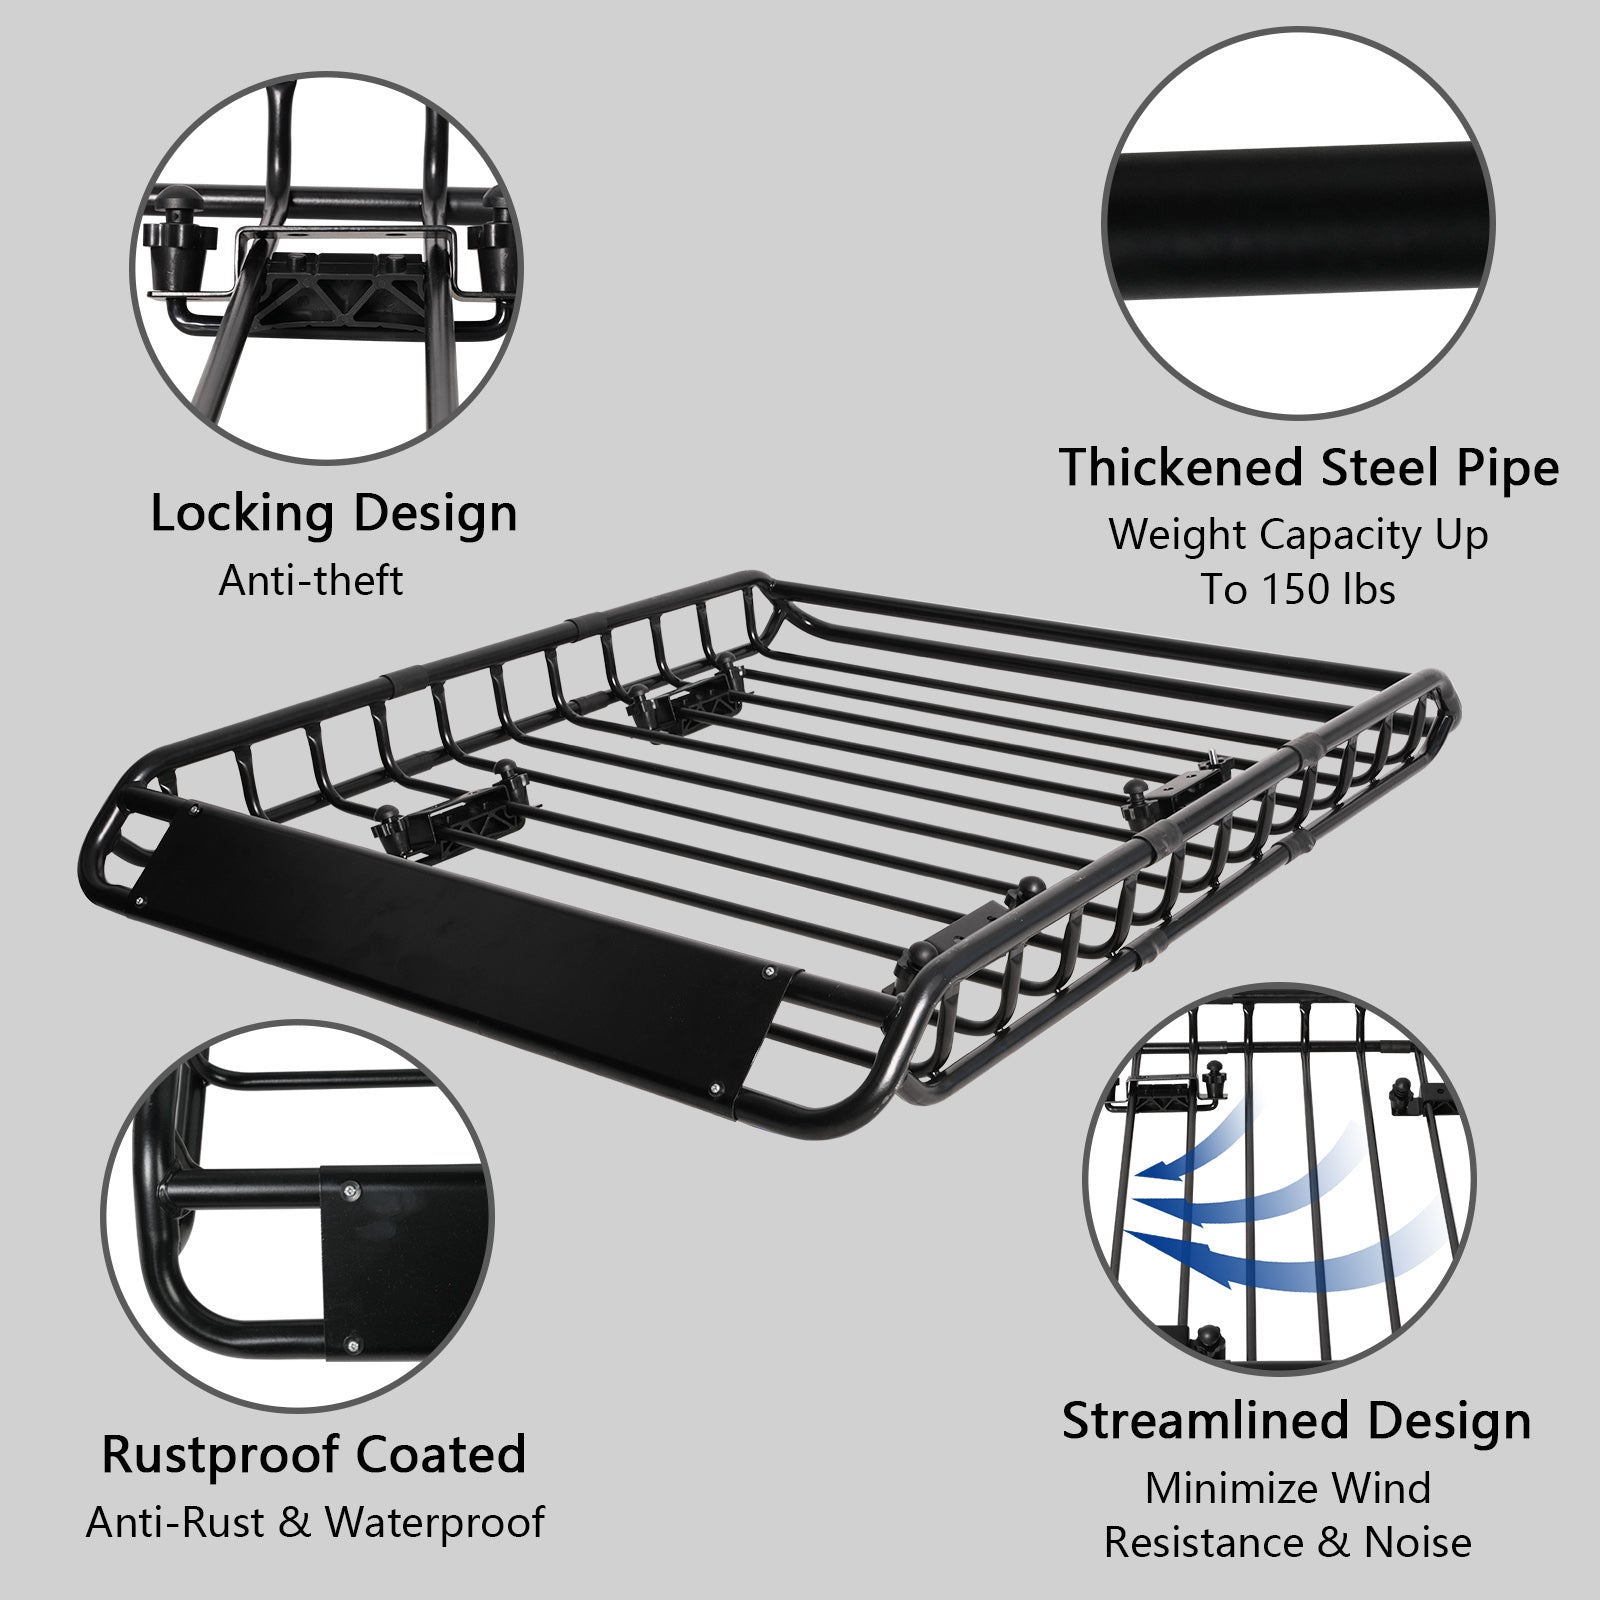 Universal Roof Rack Basket: 45 x 36 Inches Heavy-Duty Rooftop Cargo Rack, 150 lbs Cargo Carrier for SUV, Truck & Car - Black Luggage Holder